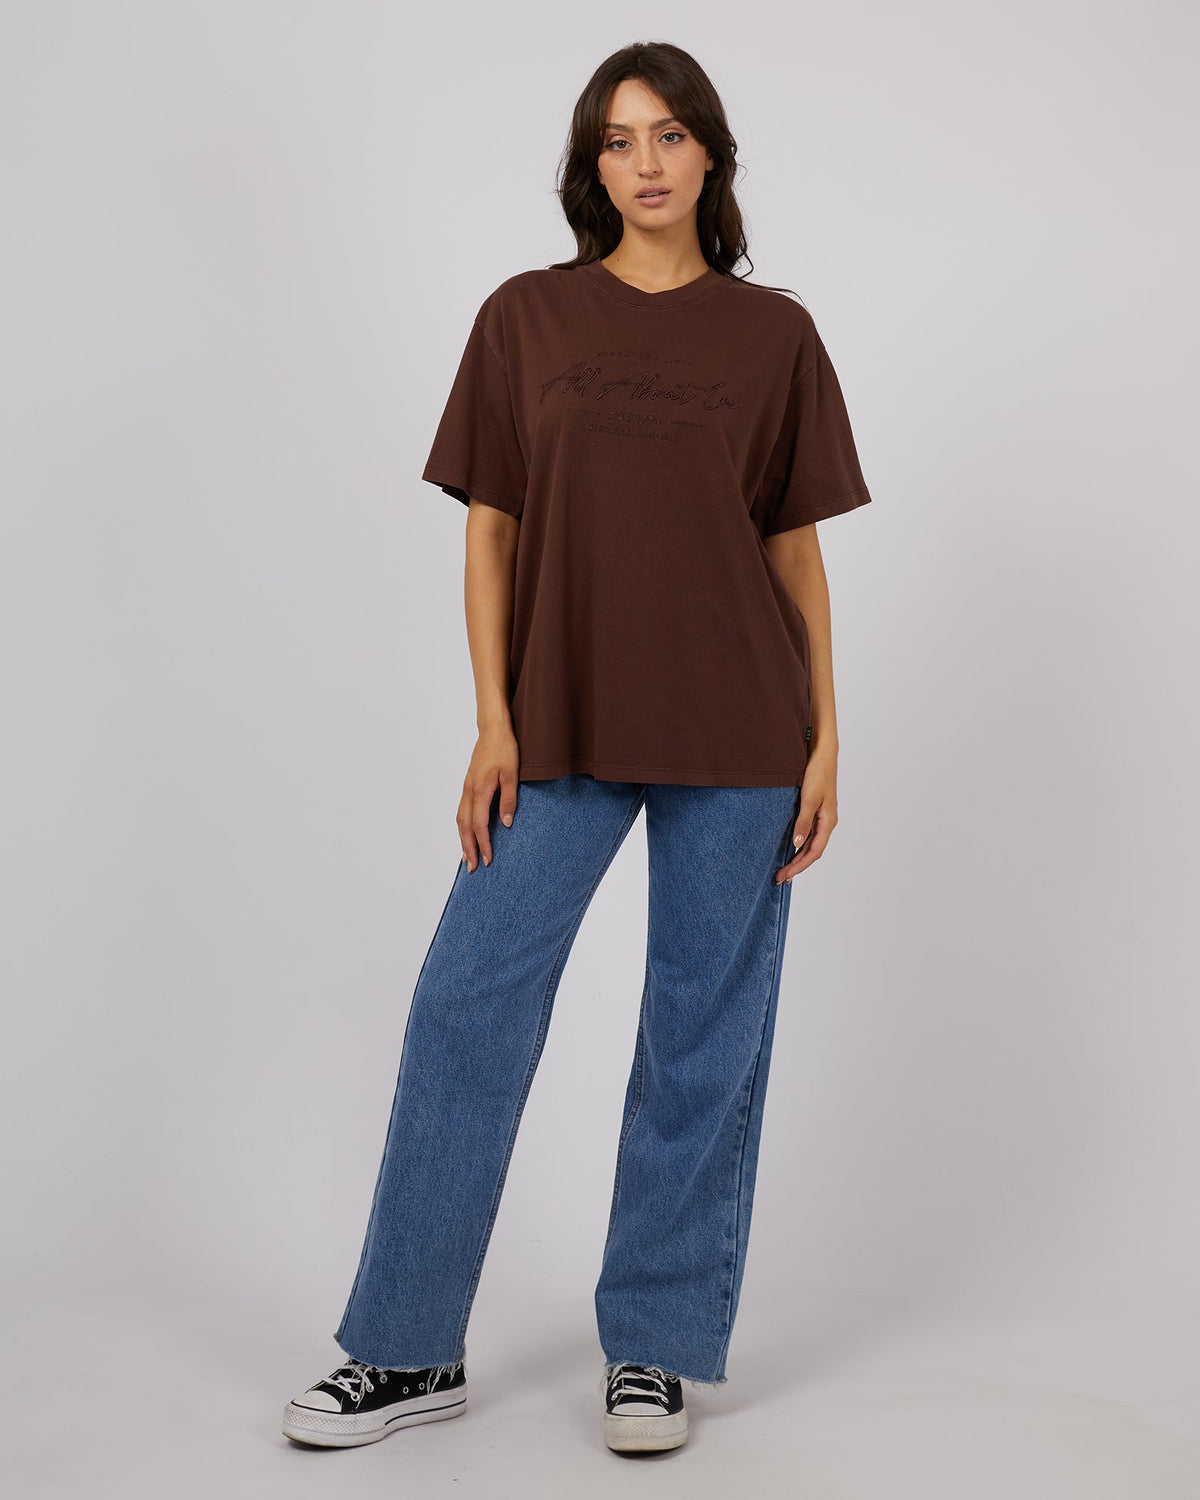 All About Eve-Classic Tee Brown-Edge Clothing